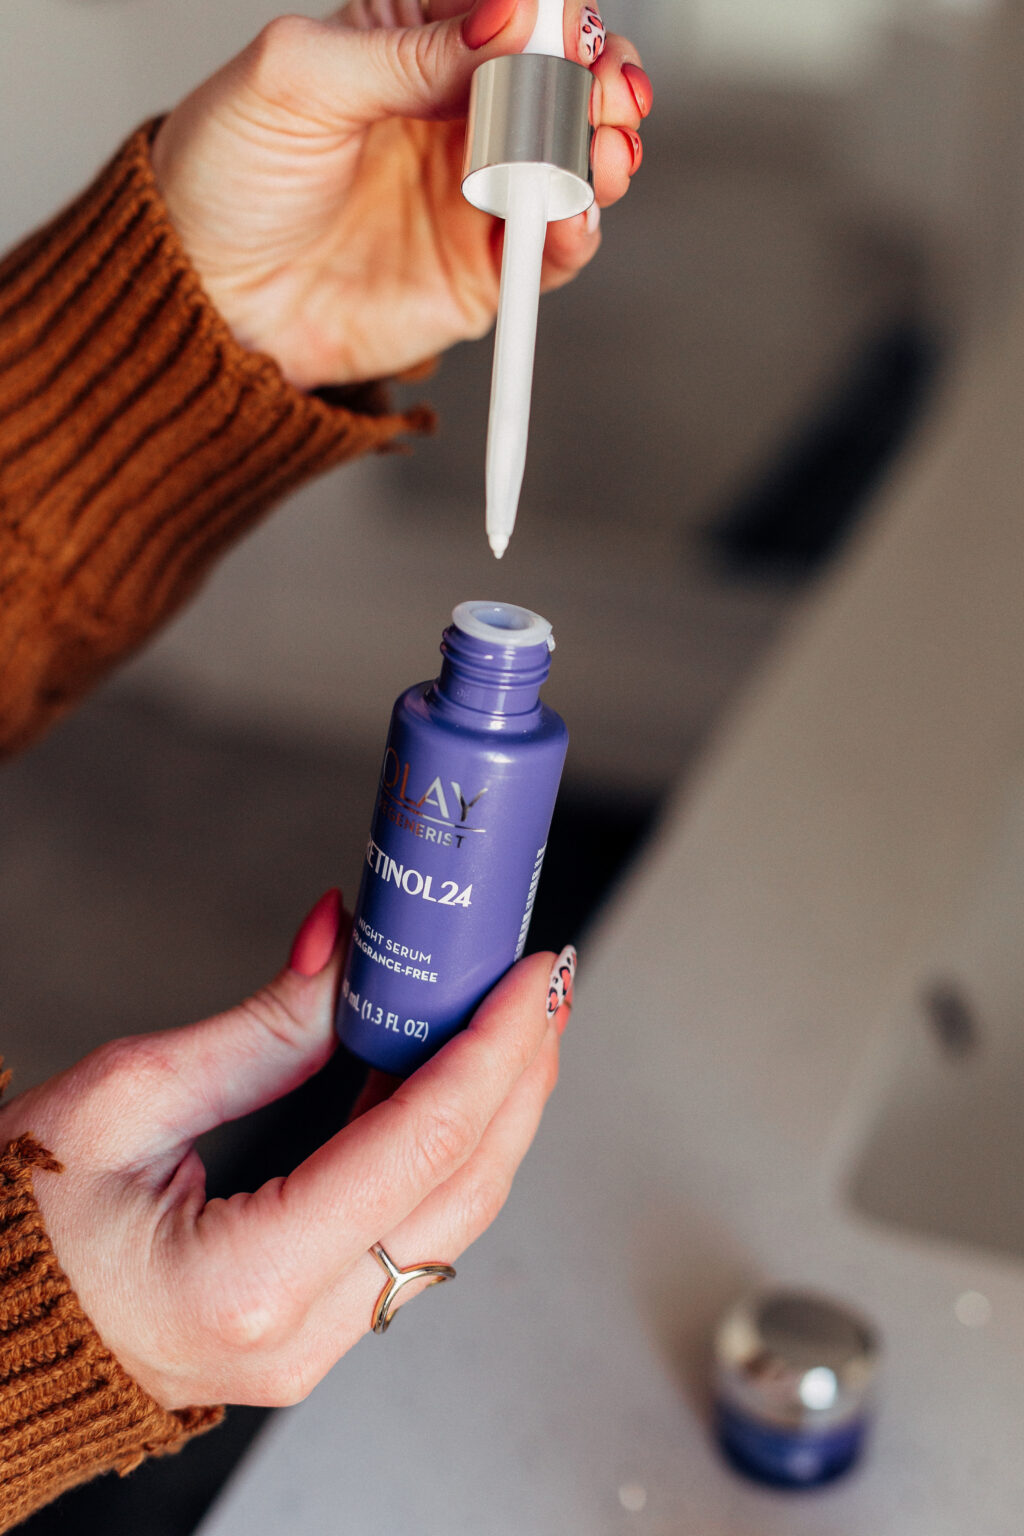 retinol is, it's vitamin A that is meant to enrich your skin as you age. 